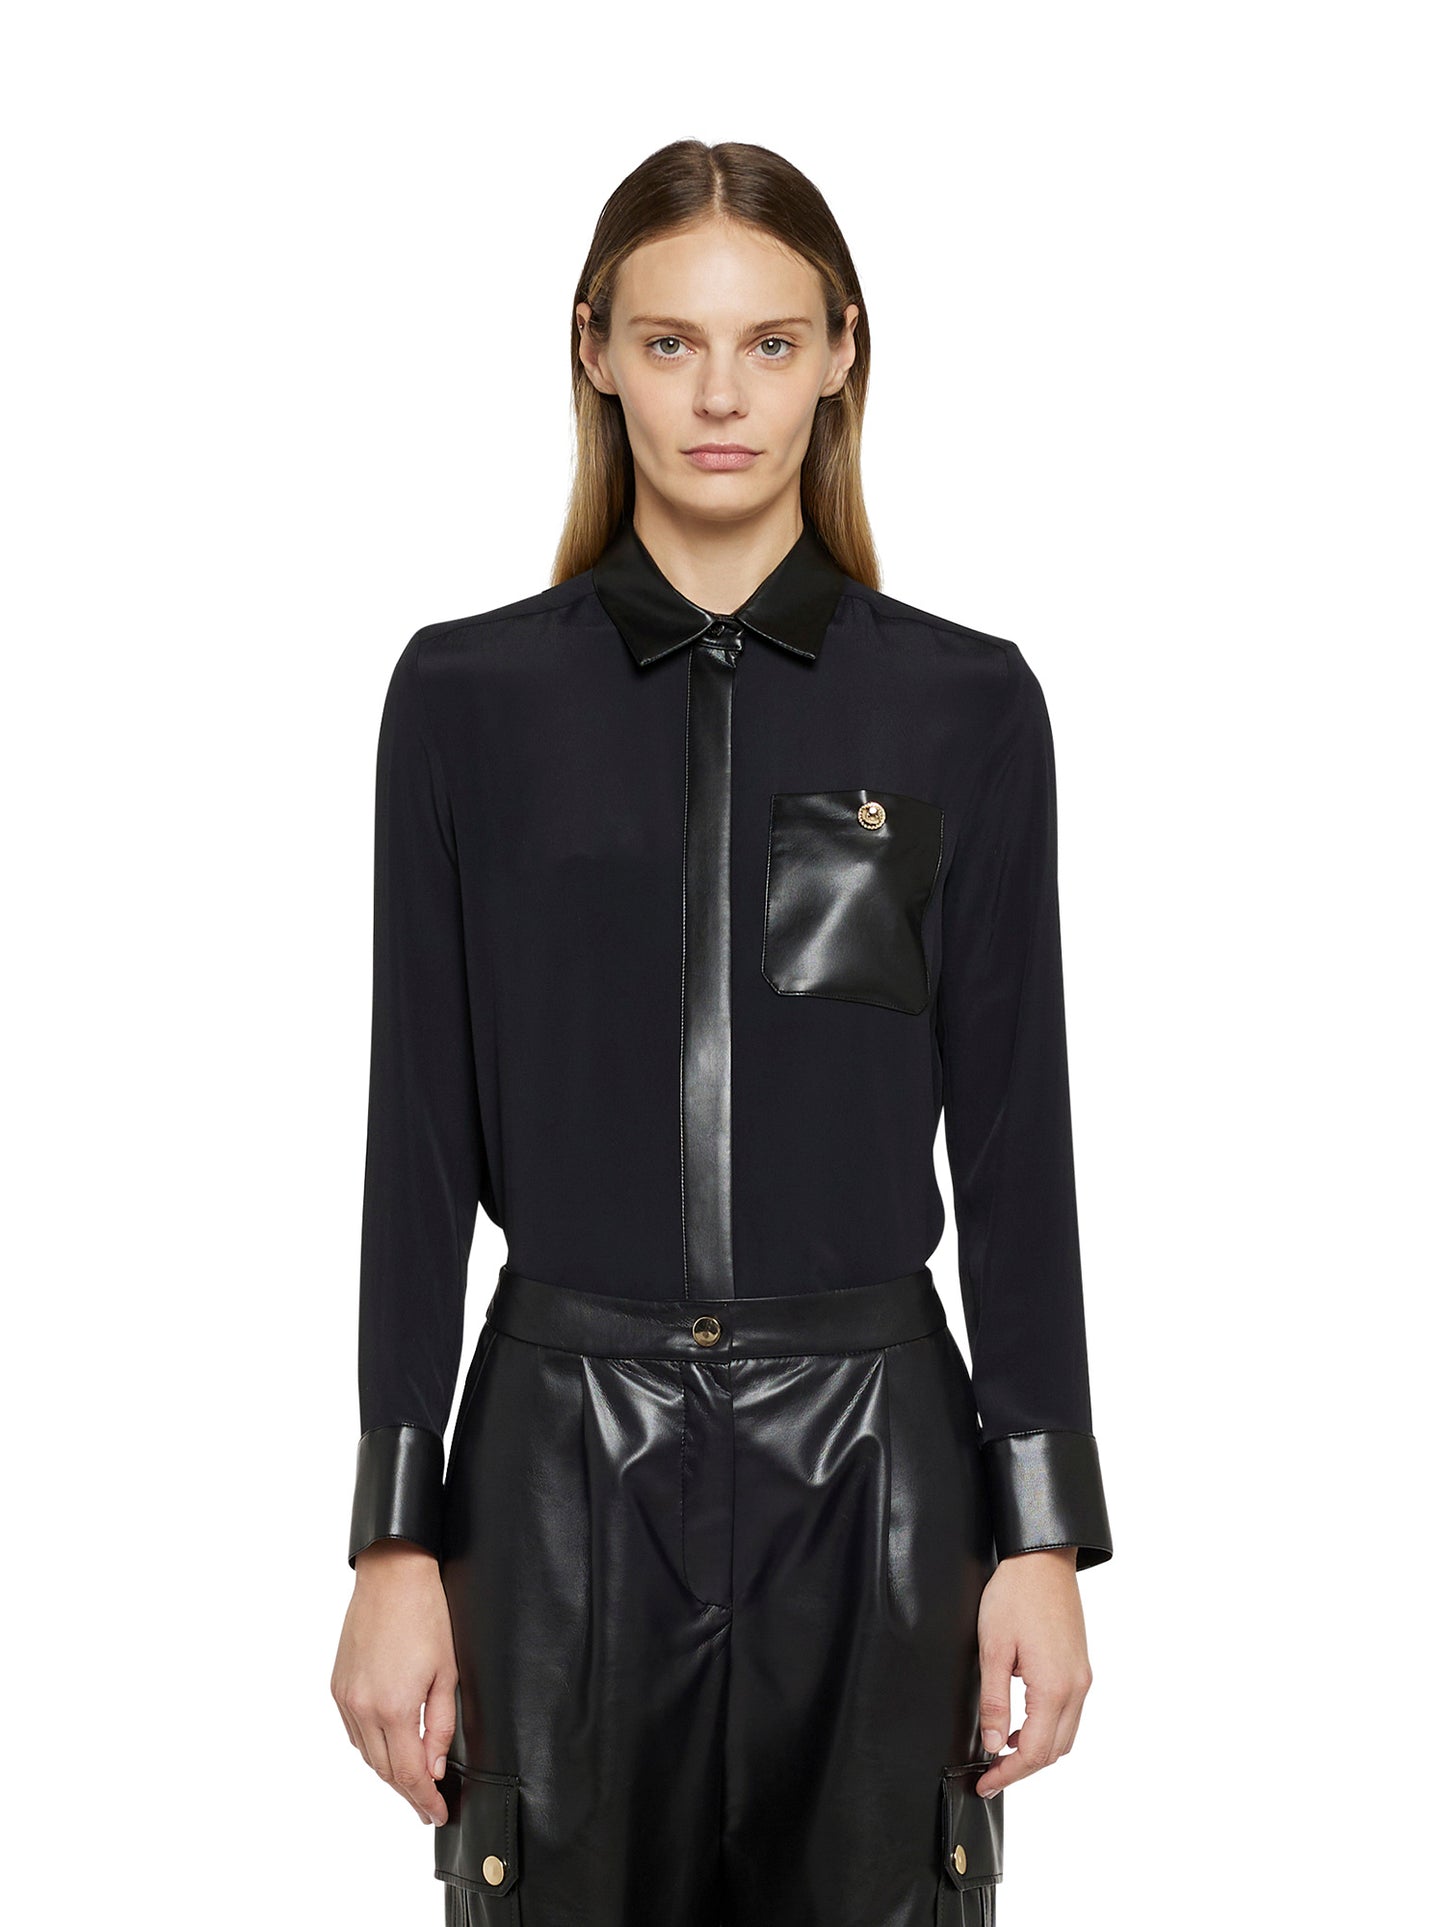 Silk acetate shirt with faux leather details